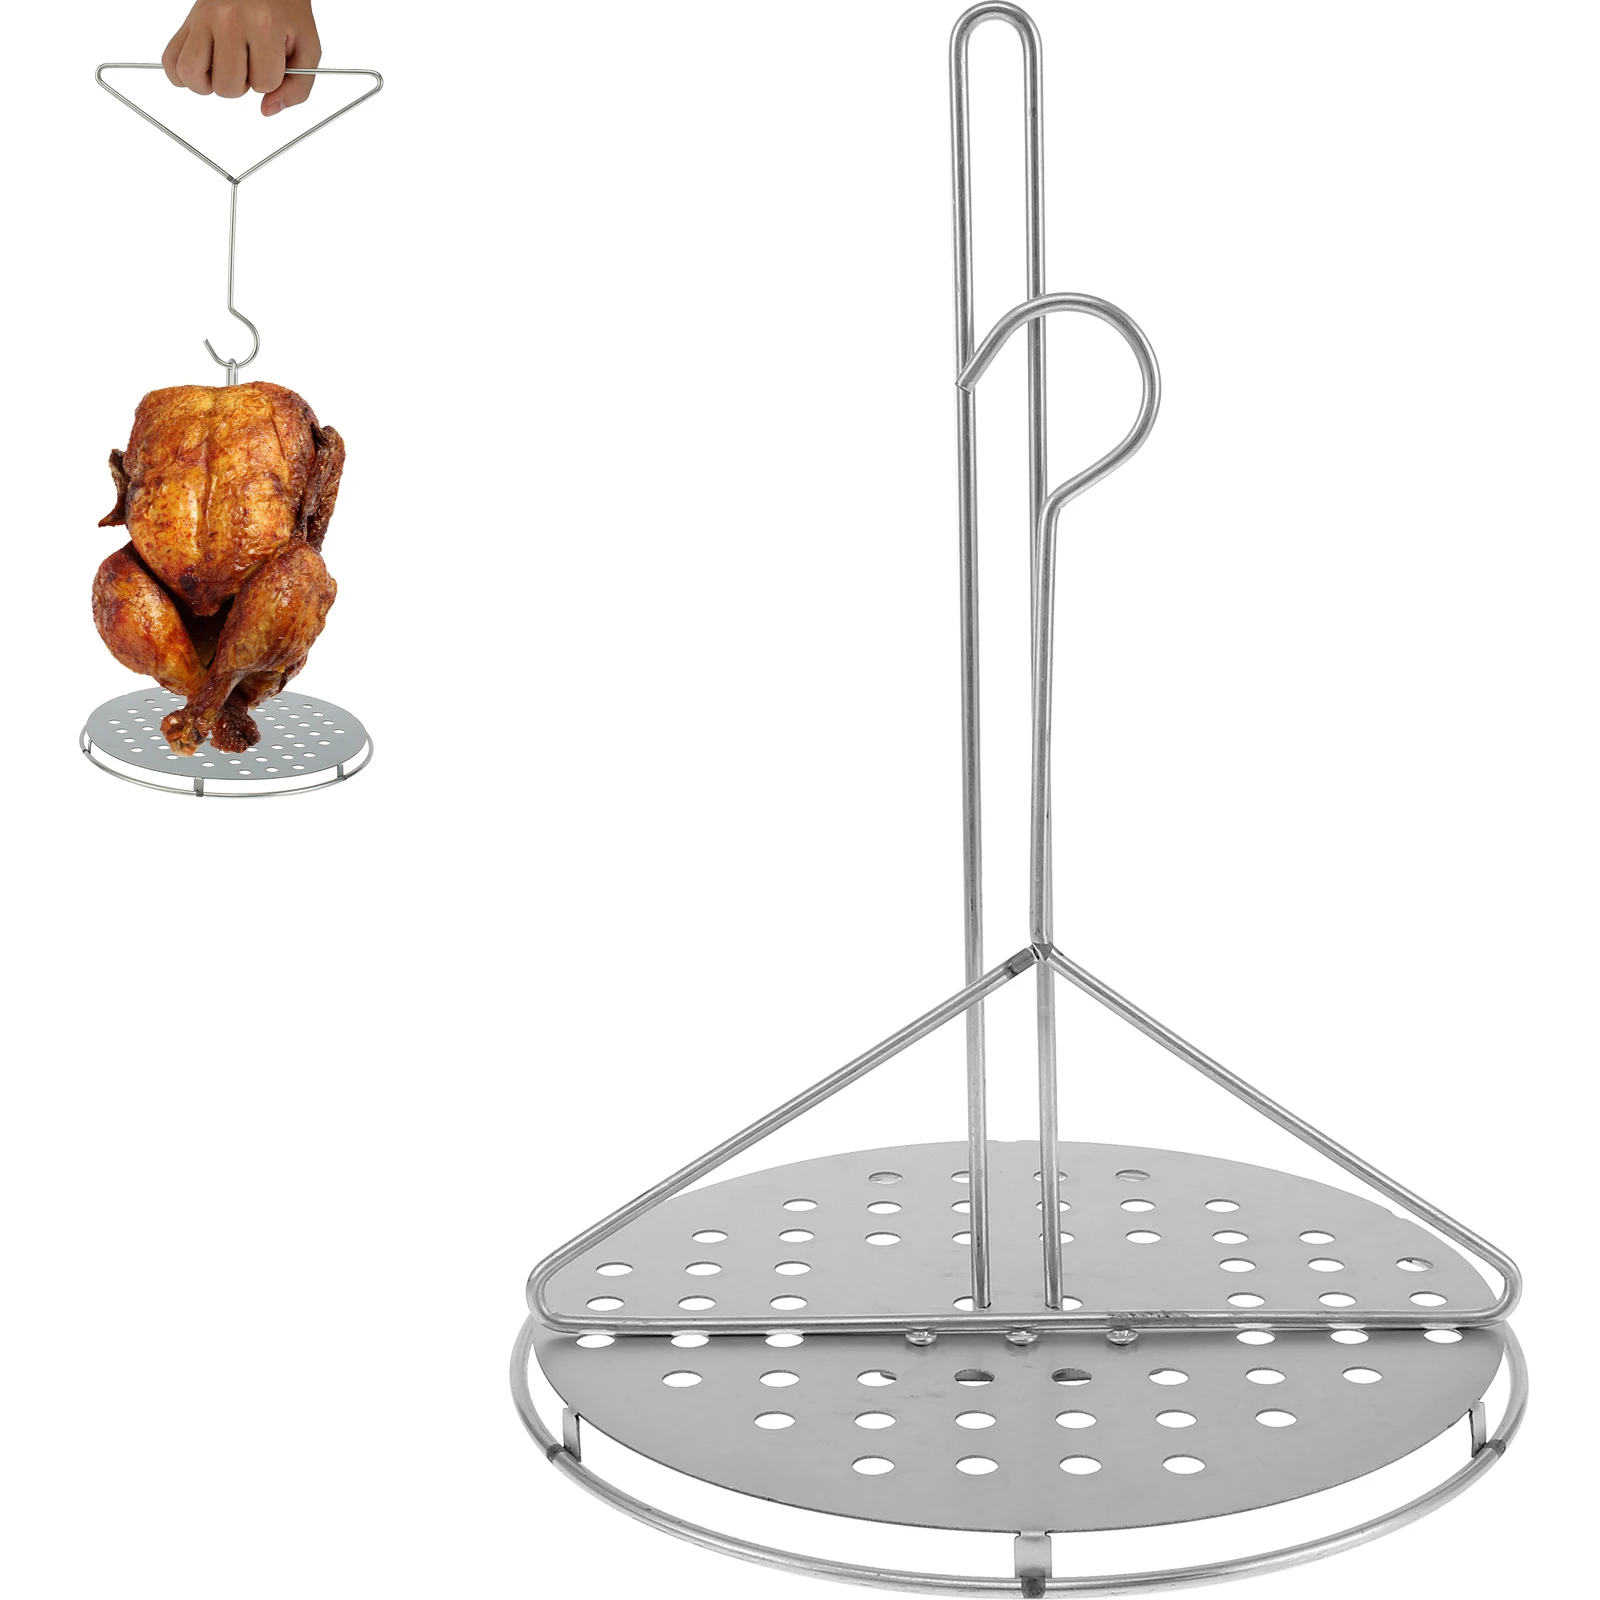 

Turkey Holder Heavy Duty Metal Chicken Holder Portable Detachable Poultry Hanger Multifunctional Vertical Grill Rack Barbecue